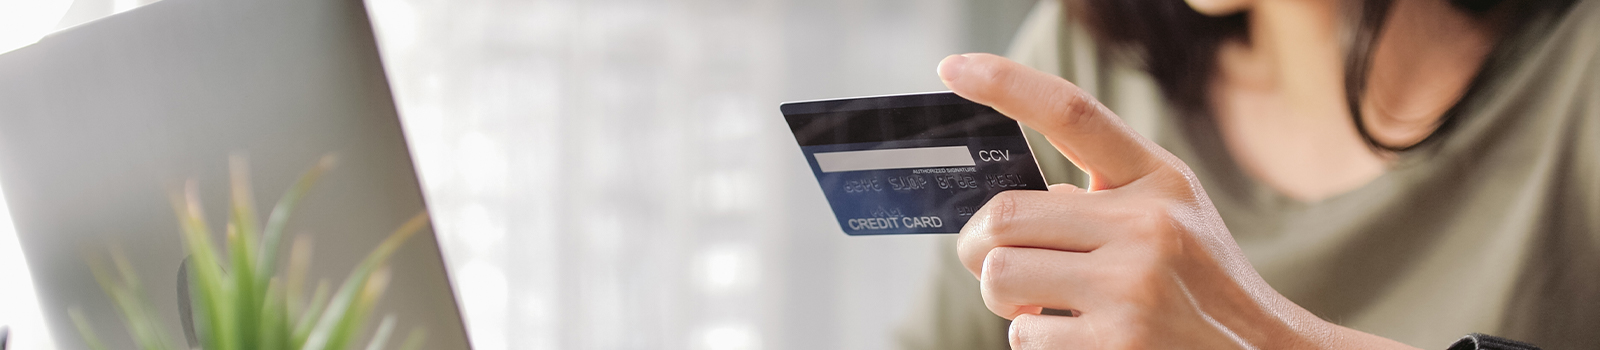 Using Credit Cards Responsibly in Uncertain Times Banner image